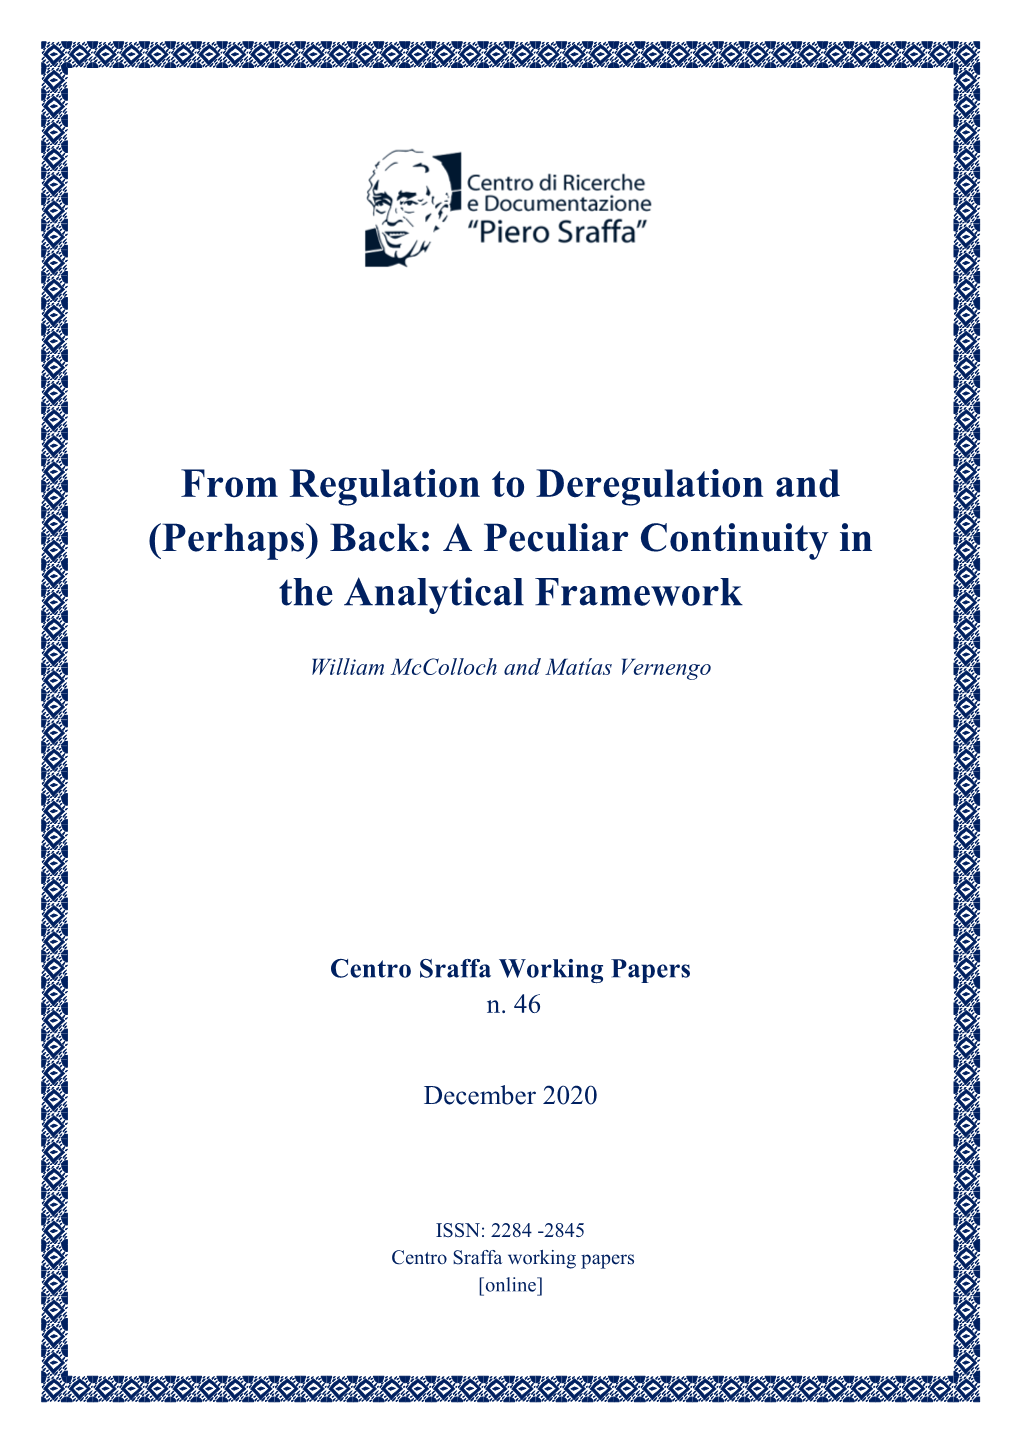 From Regulation to Deregulation and (Perhaps) Back: a Peculiar Continuity in the Analytical Framework